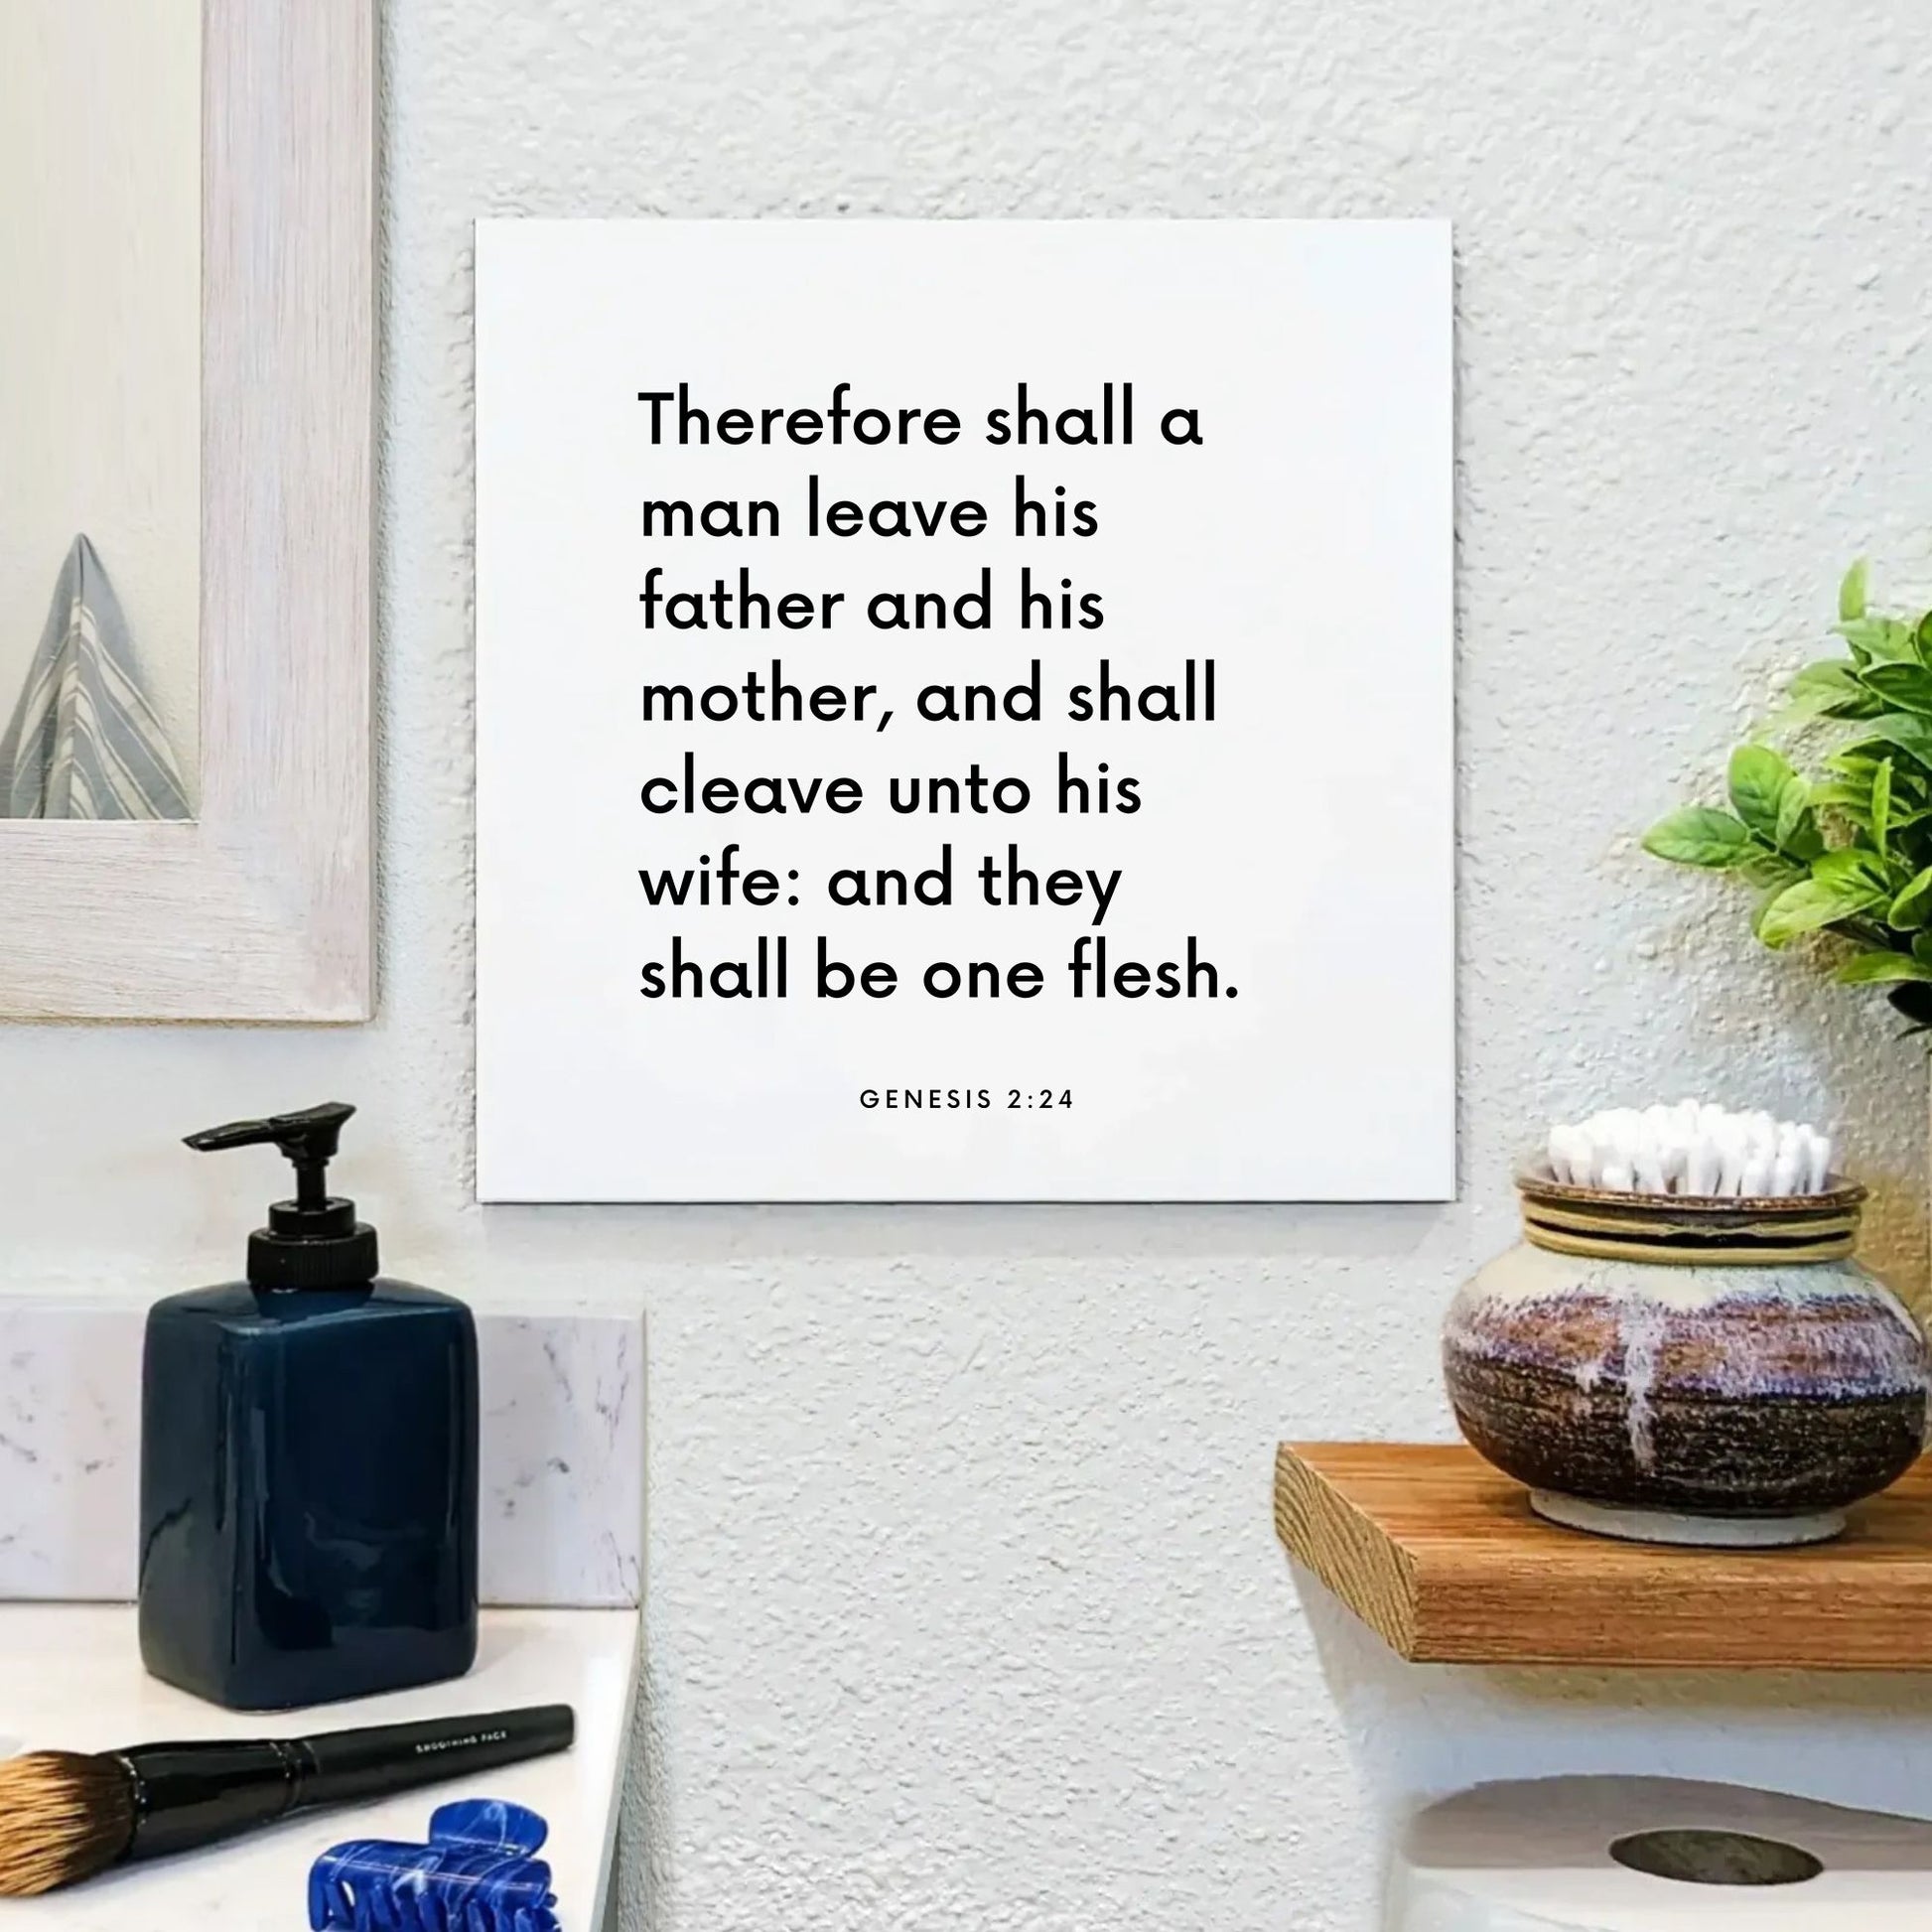 Bathroom mouting of the scripture tile for Genesis 2:24 - "Therefore shall a man leave his father and his mother"